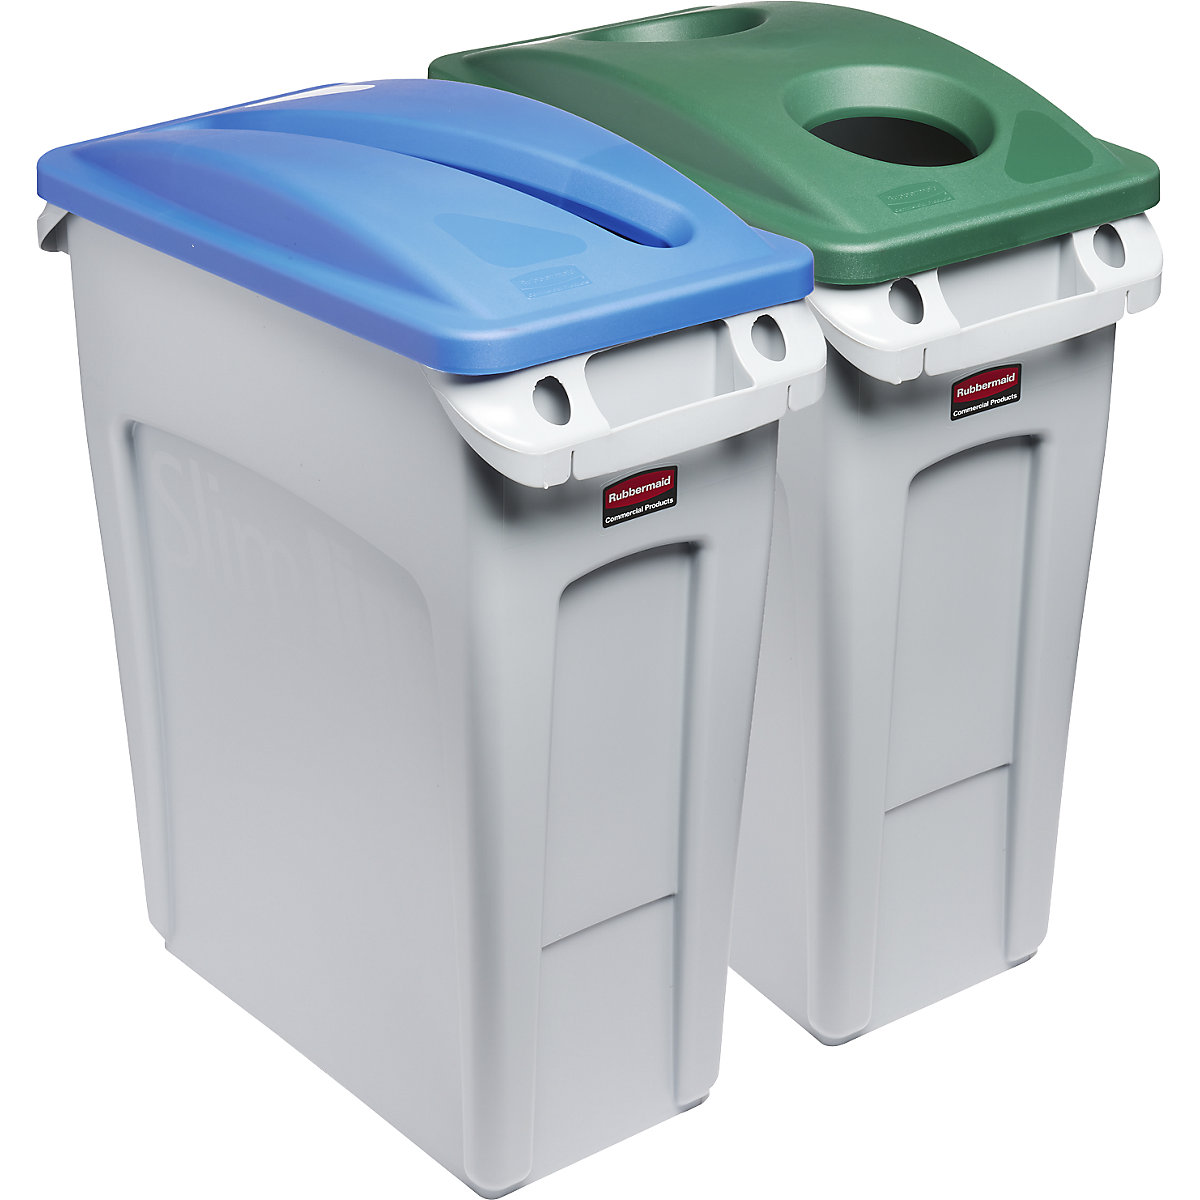 SLIM JIM® recyclable waste collection station, set of 2 - Rubbermaid